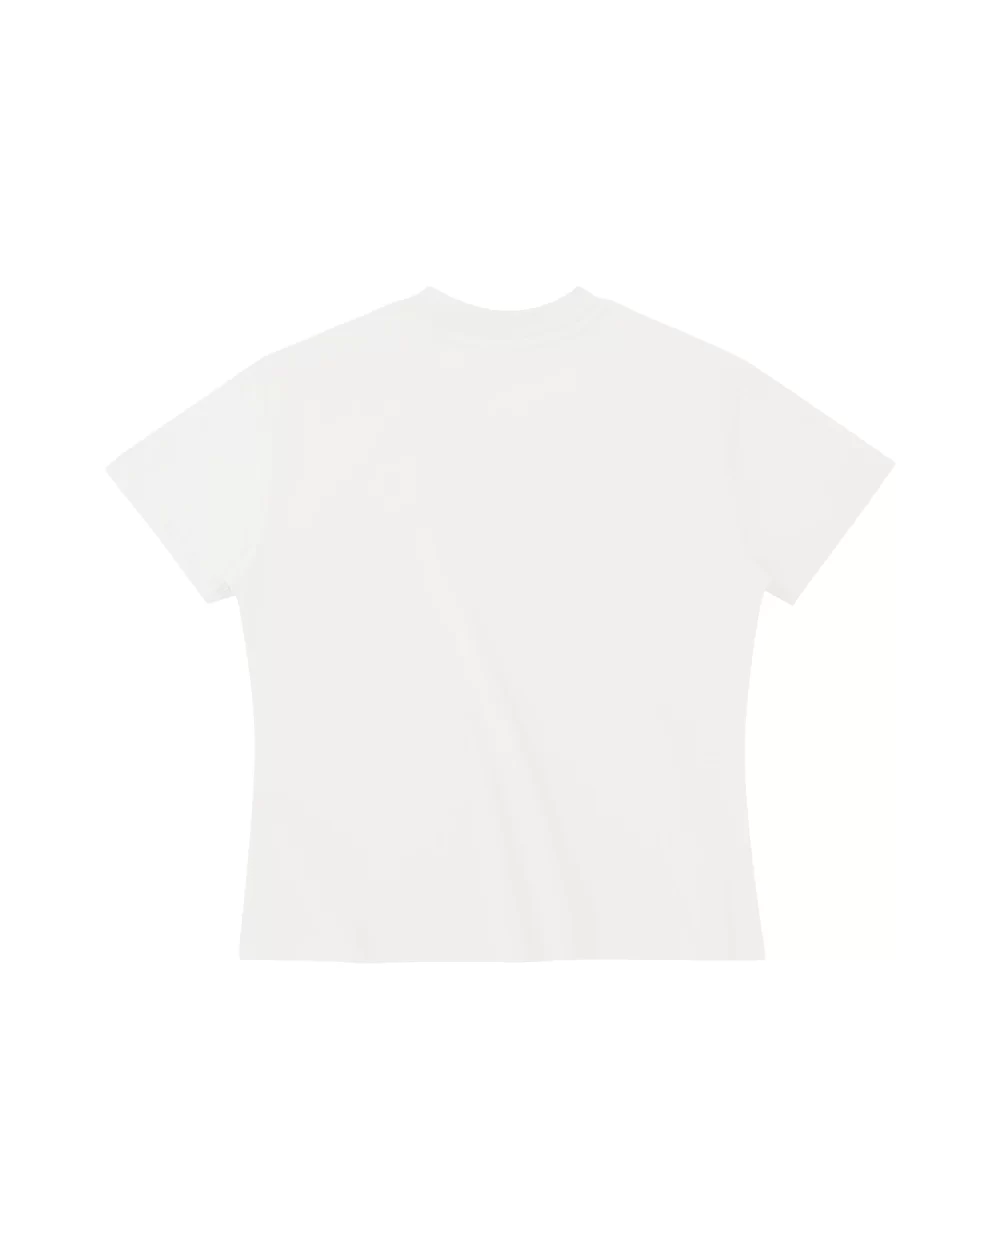 White Casual Baby Tee 6